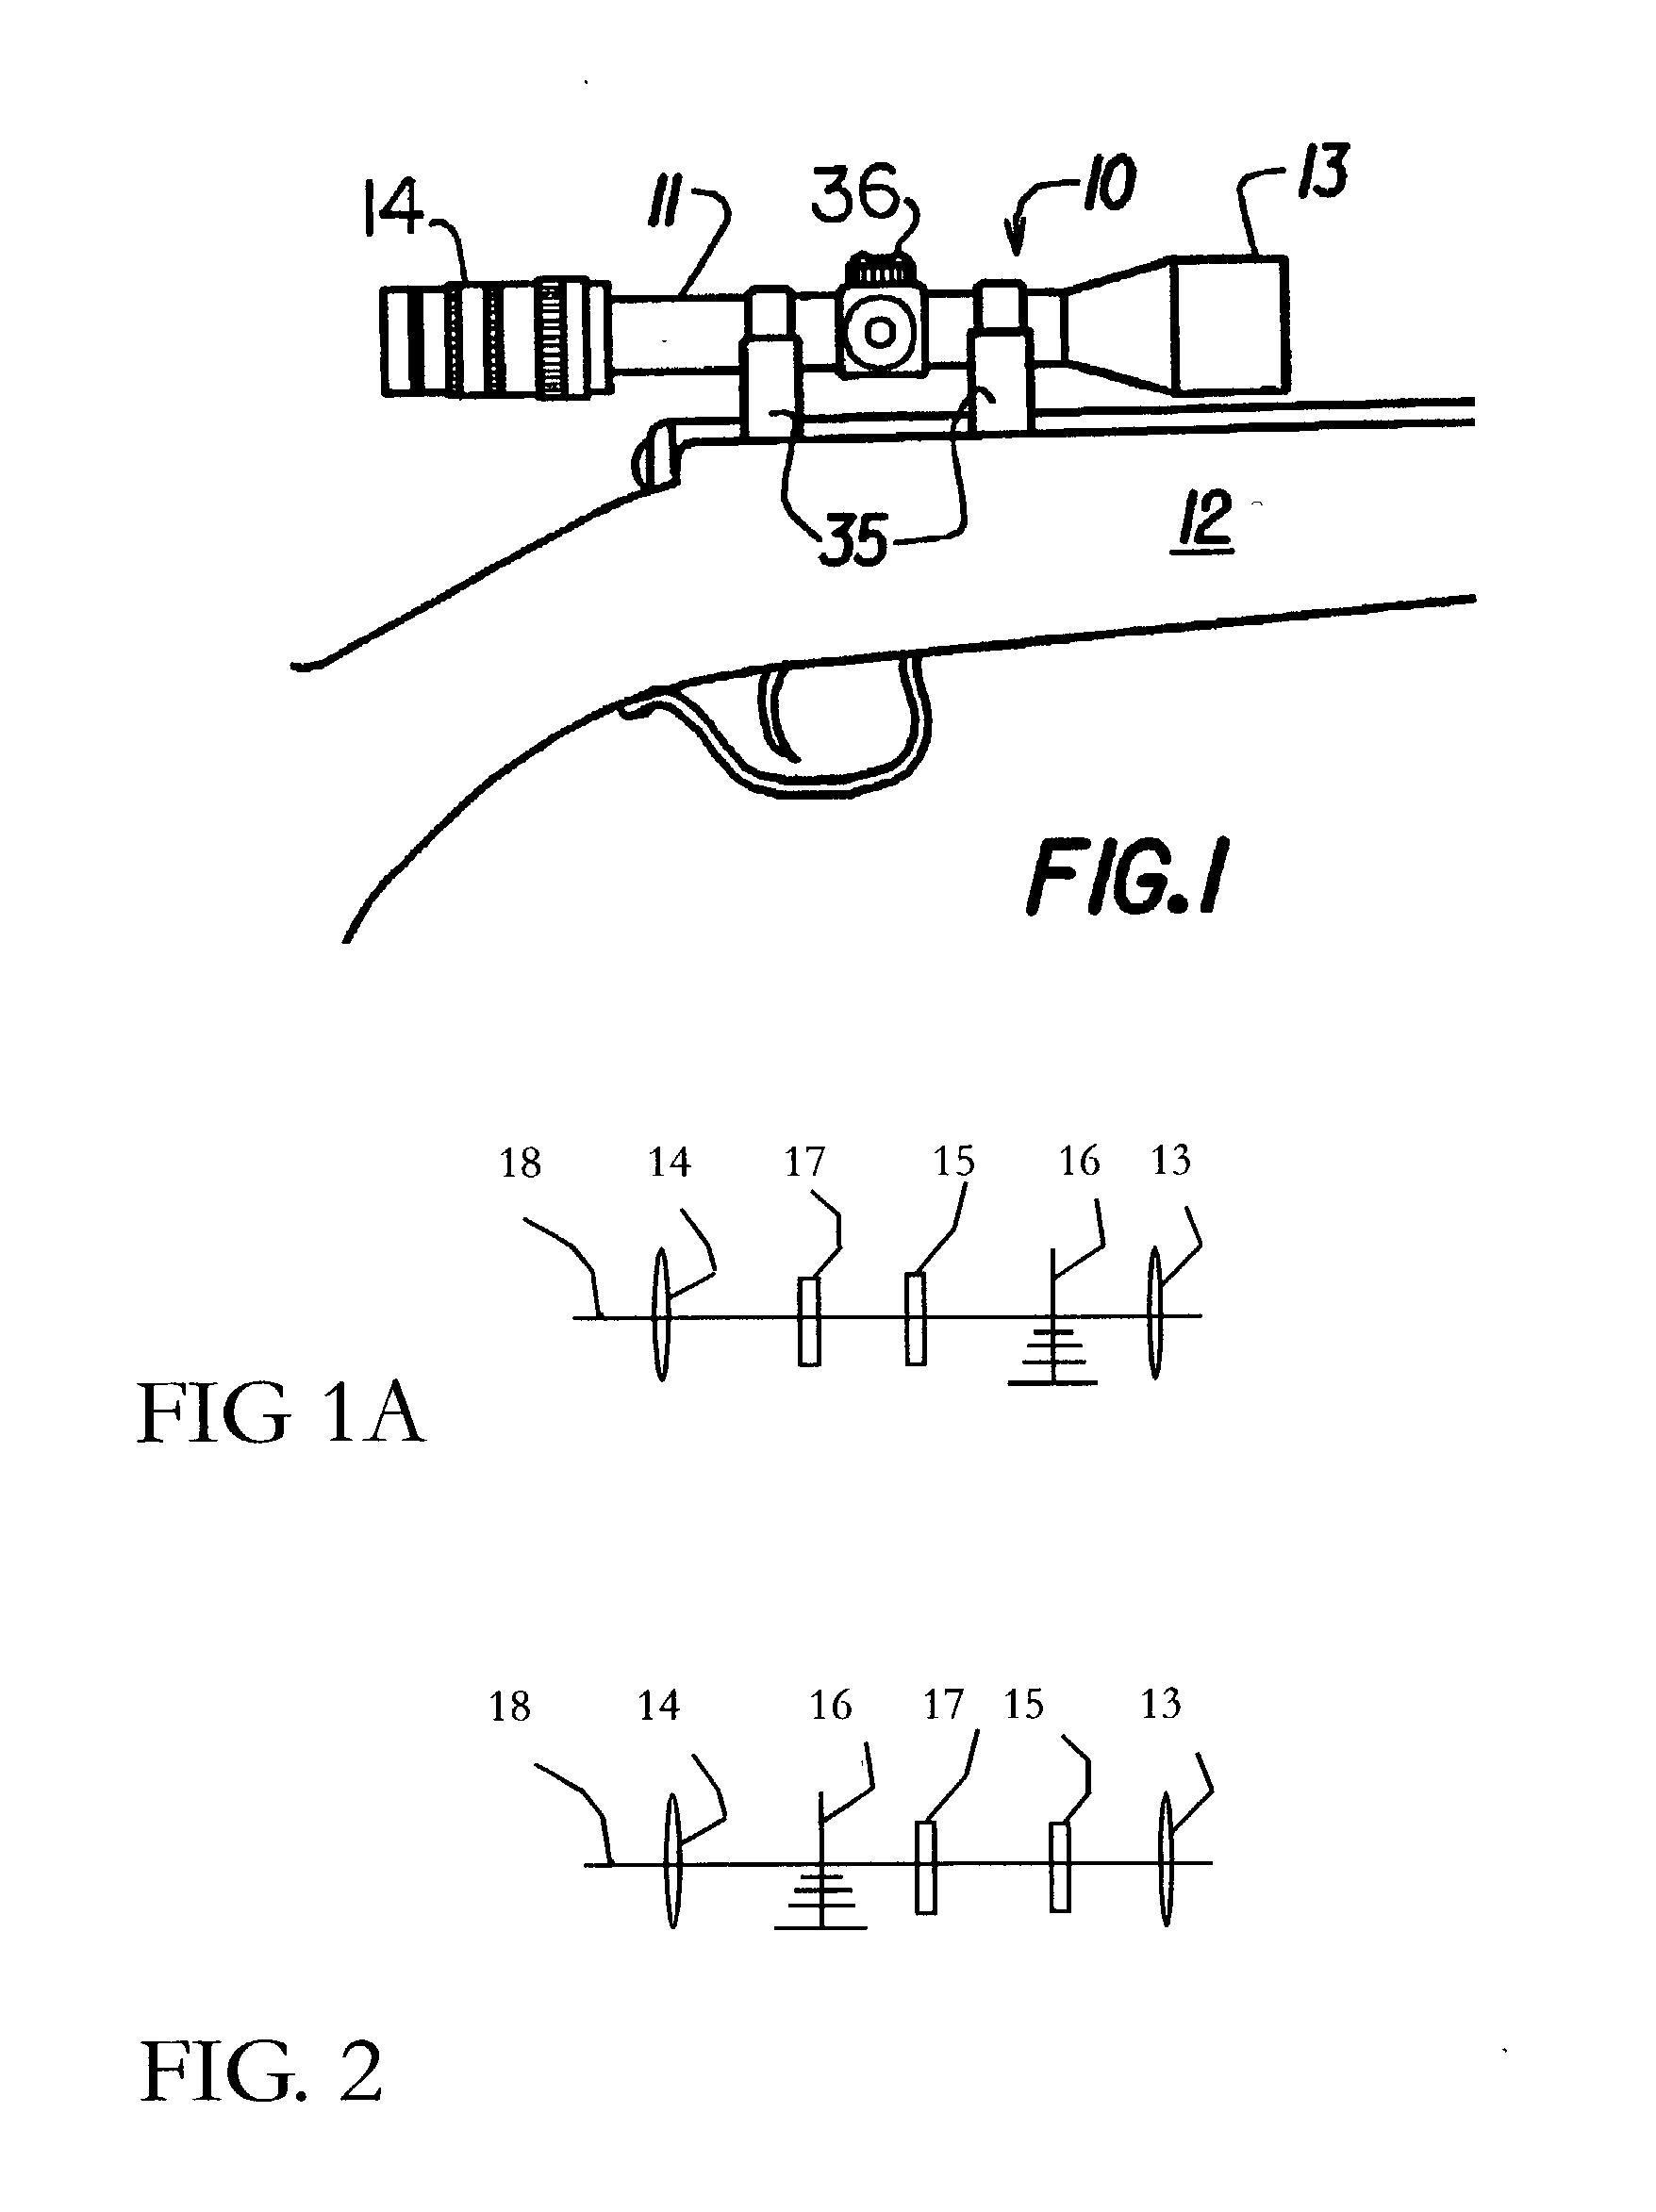 Reticle for telescopic gunsight and method for using cross reference to related application